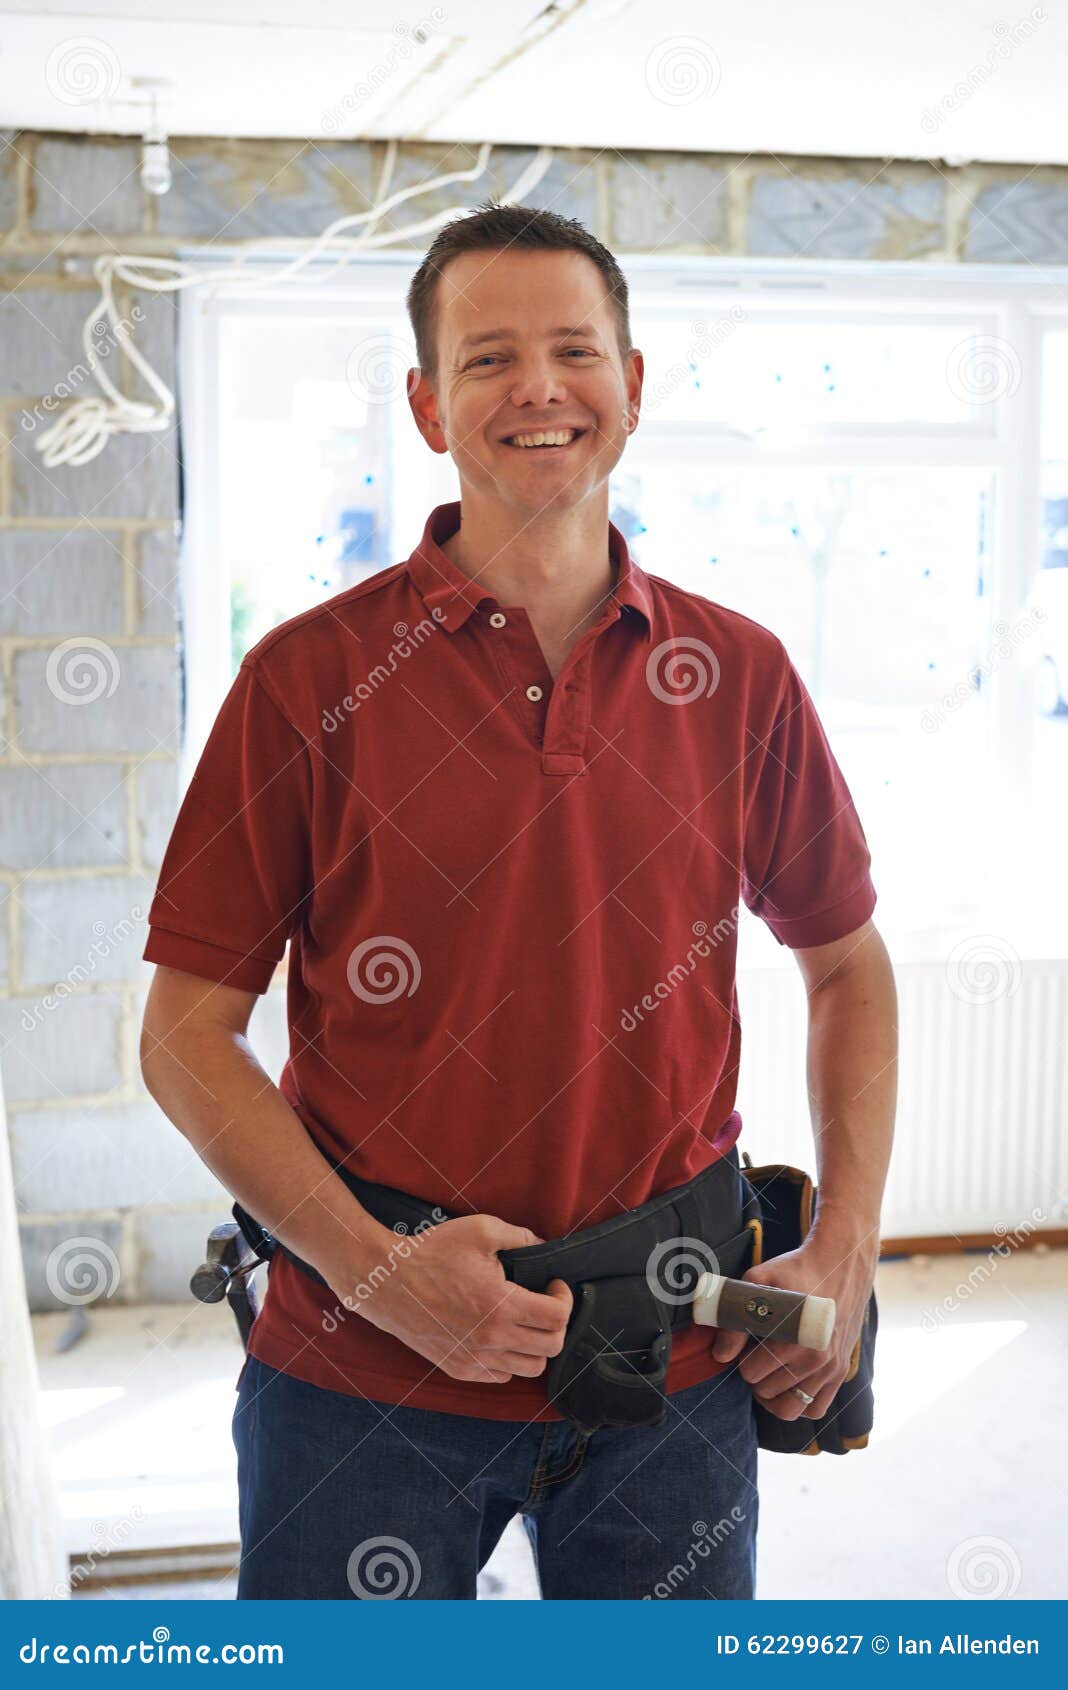 portrait of builder carrying out home improvements